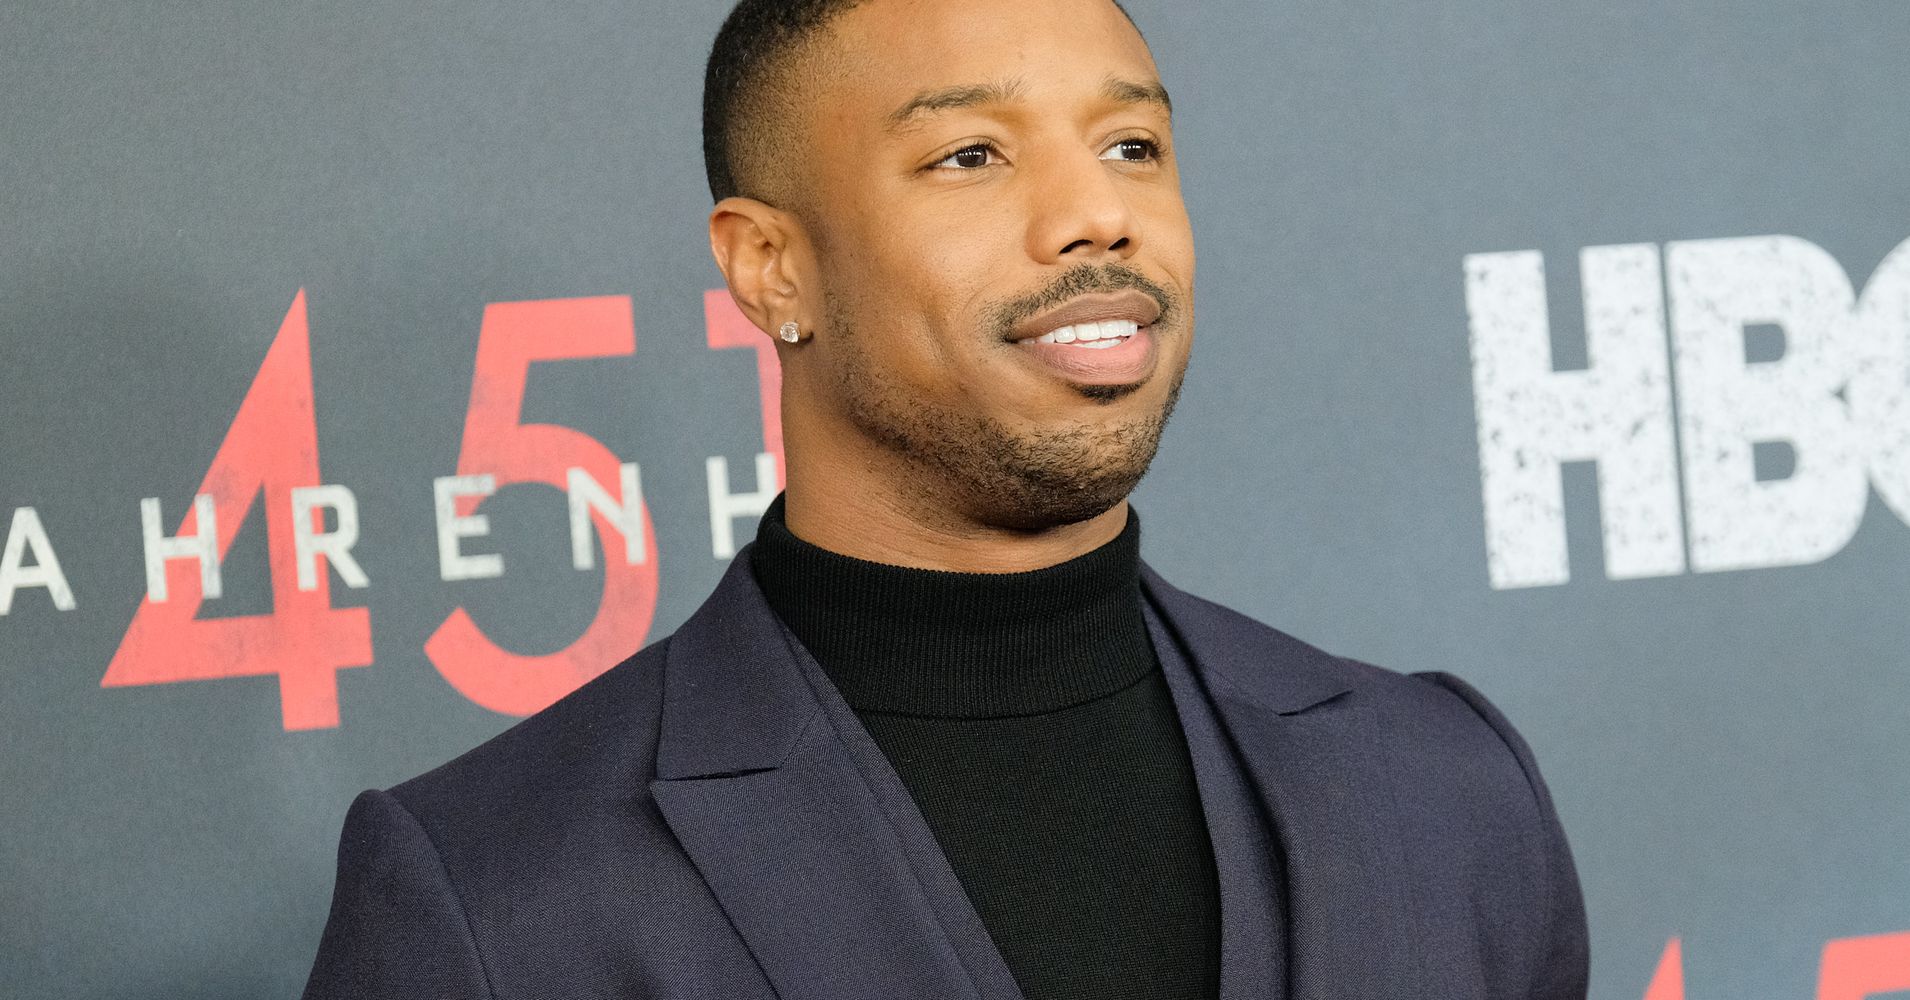 Here's Why Michael B. Jordan Said He Wants To Seek Out White Roles ...